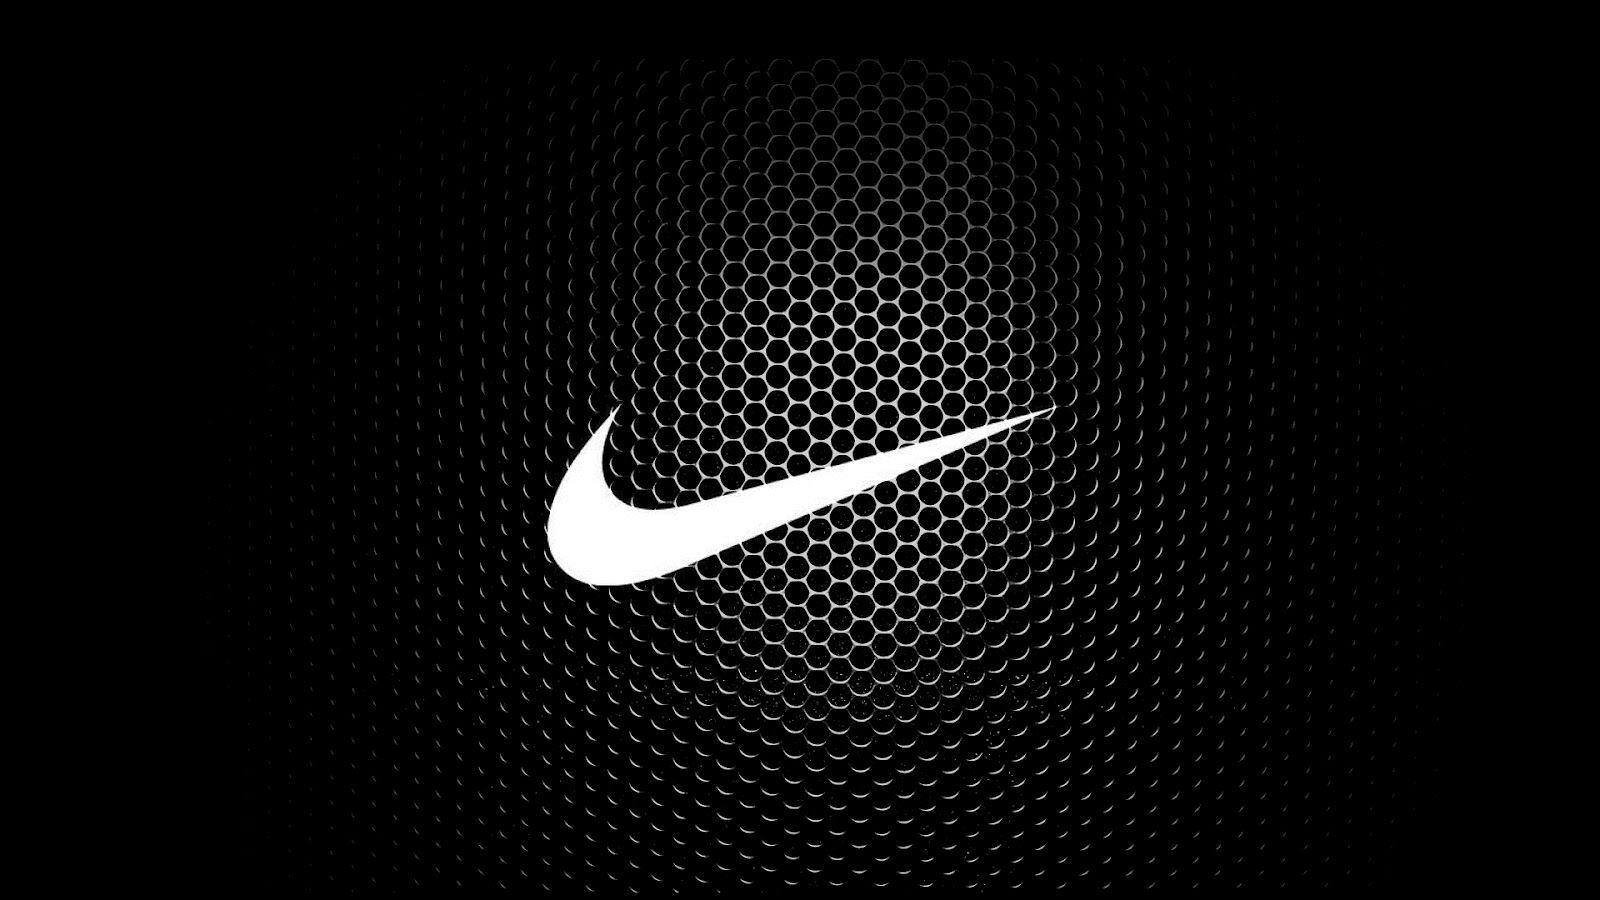 HDMOU: TOP 10 NIKE WALLPAPERS IN HD